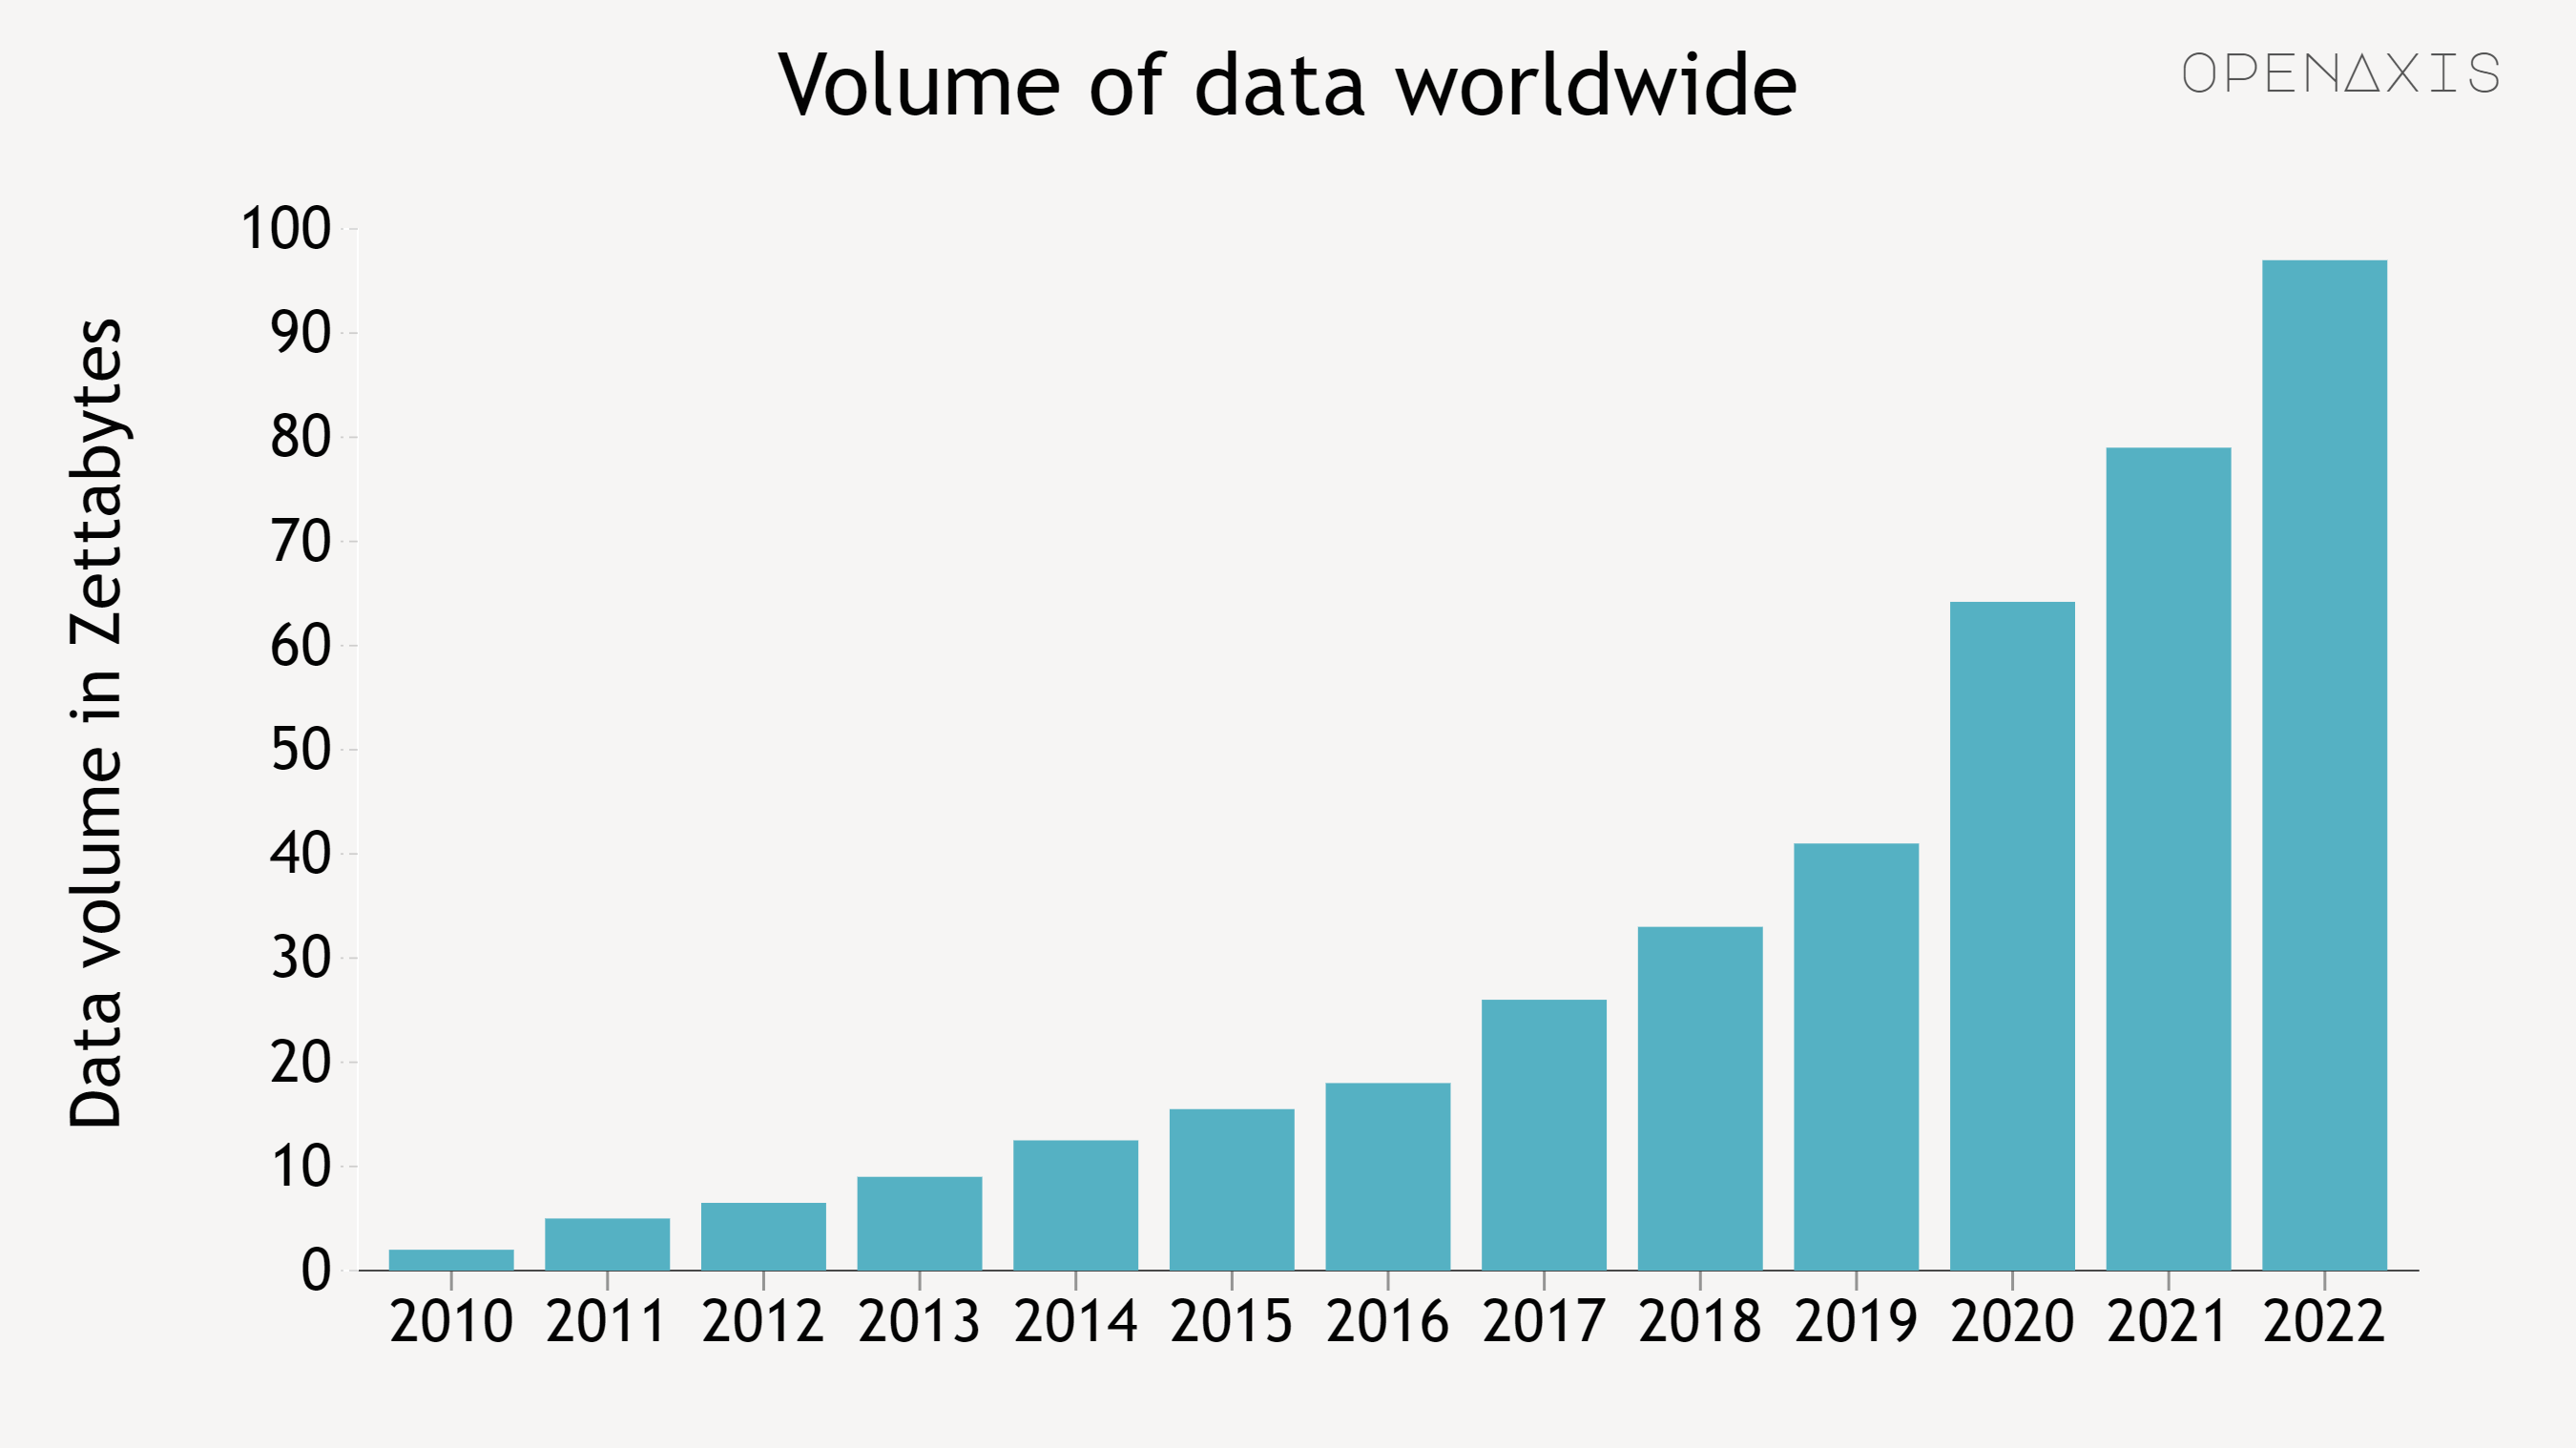 <p>The total amount of data created, captured, copied, and consumed globally is forecast to increase rapidly, reaching 64.2 zettabytes in 2020. Over the next five years up to 2025, global data creation is projected to grow to more than 180 zettabytes.</p><p><br /></p><p>In 2020, the amount of data created and replicated reached a new high. The growth was higher than previously expected caused by the increased demand due to the COVID-19 pandemic, as more people worked and learned from home and used home entertainment options more often.</p><p><br /></p><p><a href="https://app.openaxis.com/search?q=%23data" target="_blank">#data</a> ﻿<span data-index="0" data-denotation-char data-id="0" data-value="&lt;a href=&quot;/search?q=%23dataprivacy&quot; target=_self&gt;#dataprivacy" data-link="/search?q=%23dataprivacy">﻿<span contenteditable="false"><span></span><a href="/search?q=%23dataprivacy" target="_self">#dataprivacy</a></span>﻿</span> </p><p><br /></p><p>Source: <a href="/data/3734" target="_blank">Statista Research Department</a></p><p><br /></p>